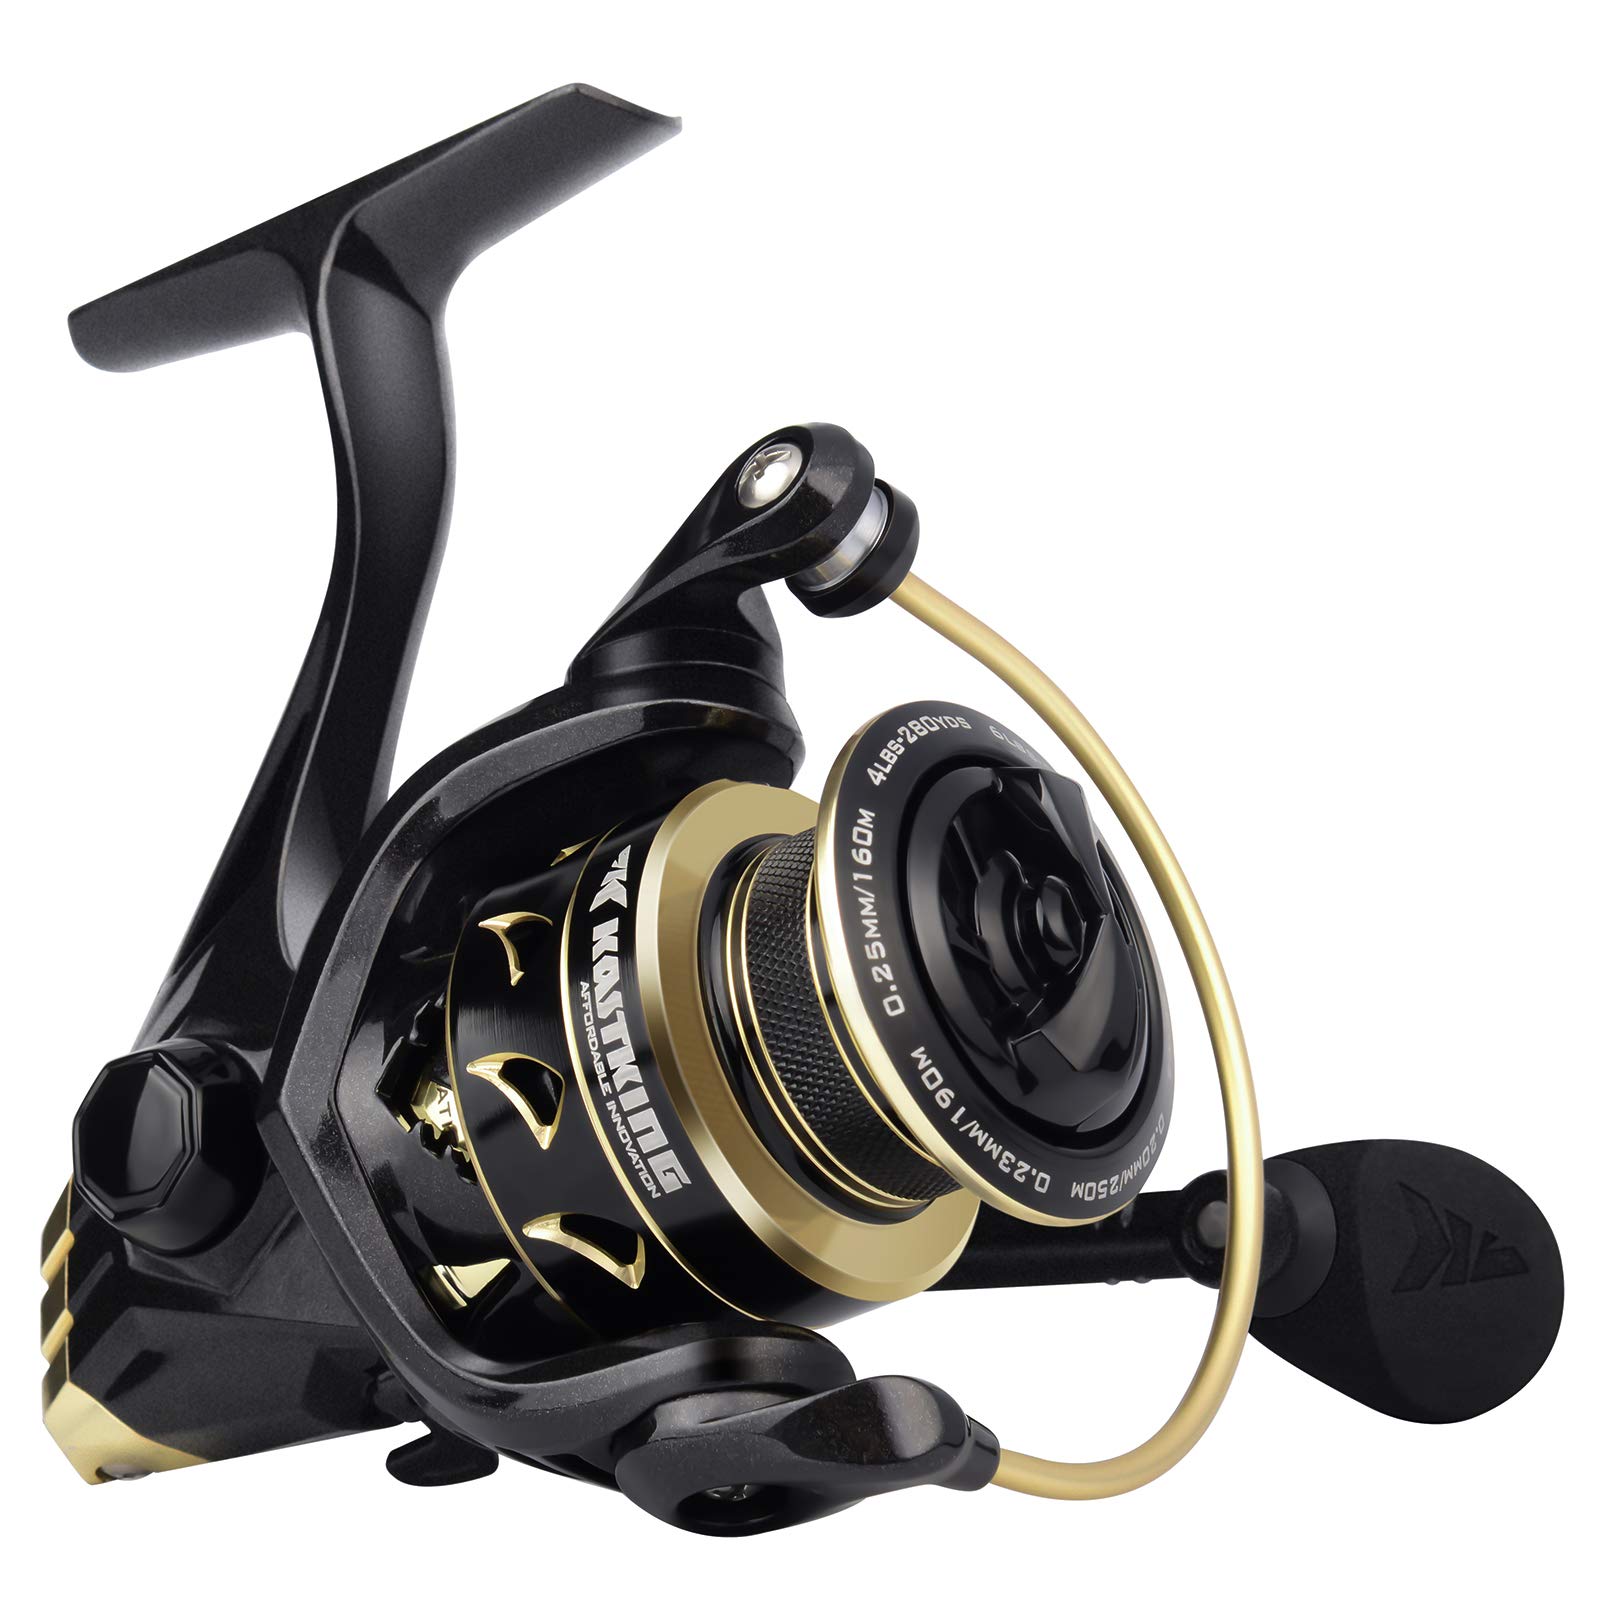 KastKing Valiant Eagle Gold Spinning Reel - 6.2:1 High-Speed Gear Ratio,  Freshwater and Saltwater Fishing